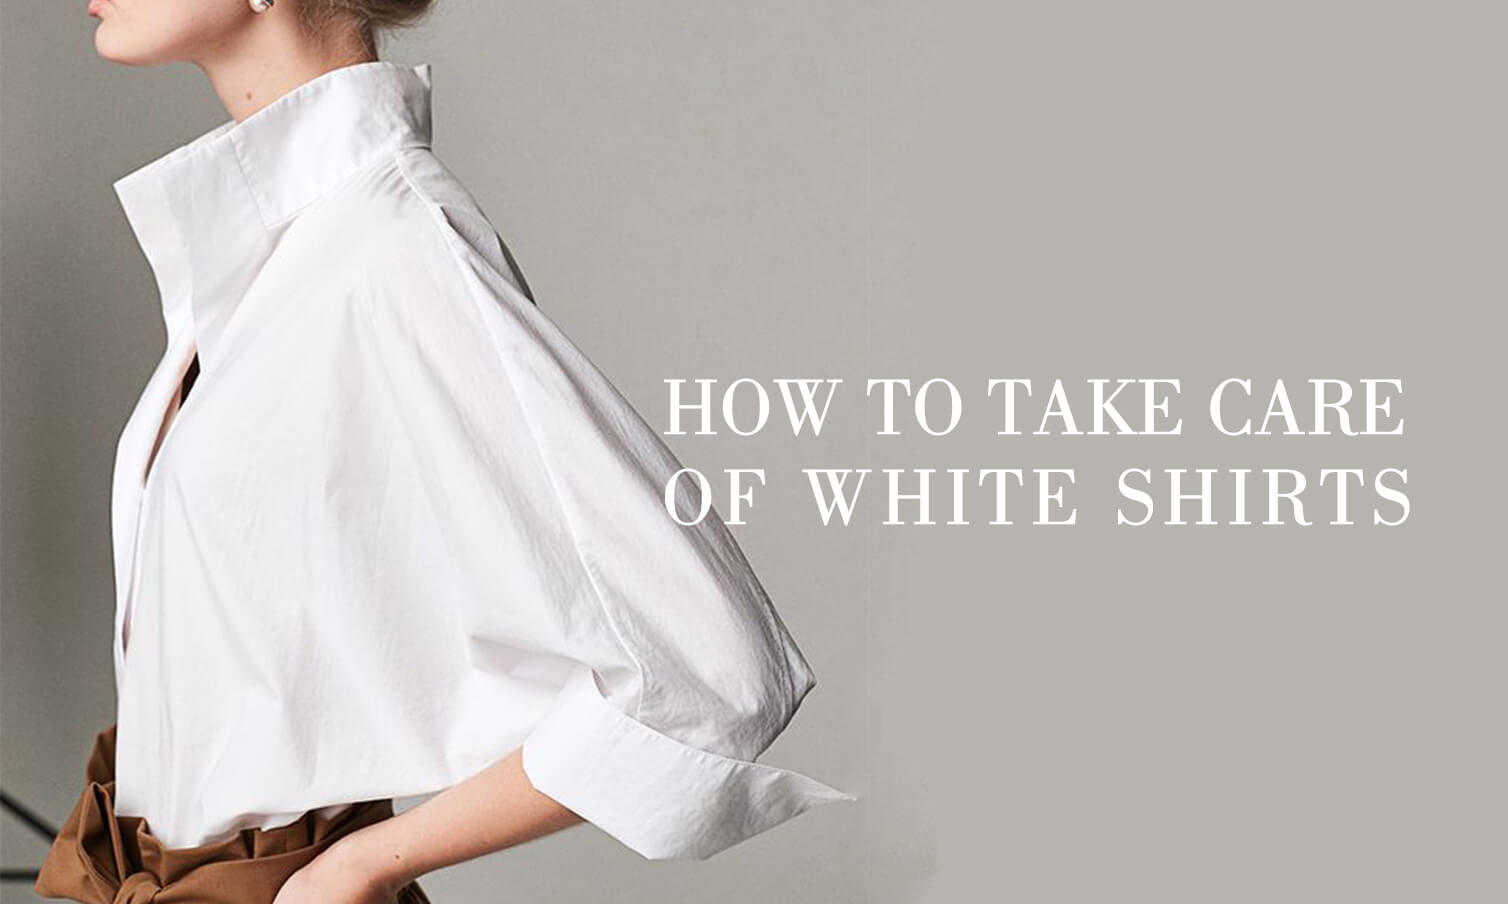 HOW TO TAKE CARE OF YOUR WHITE SHIRT